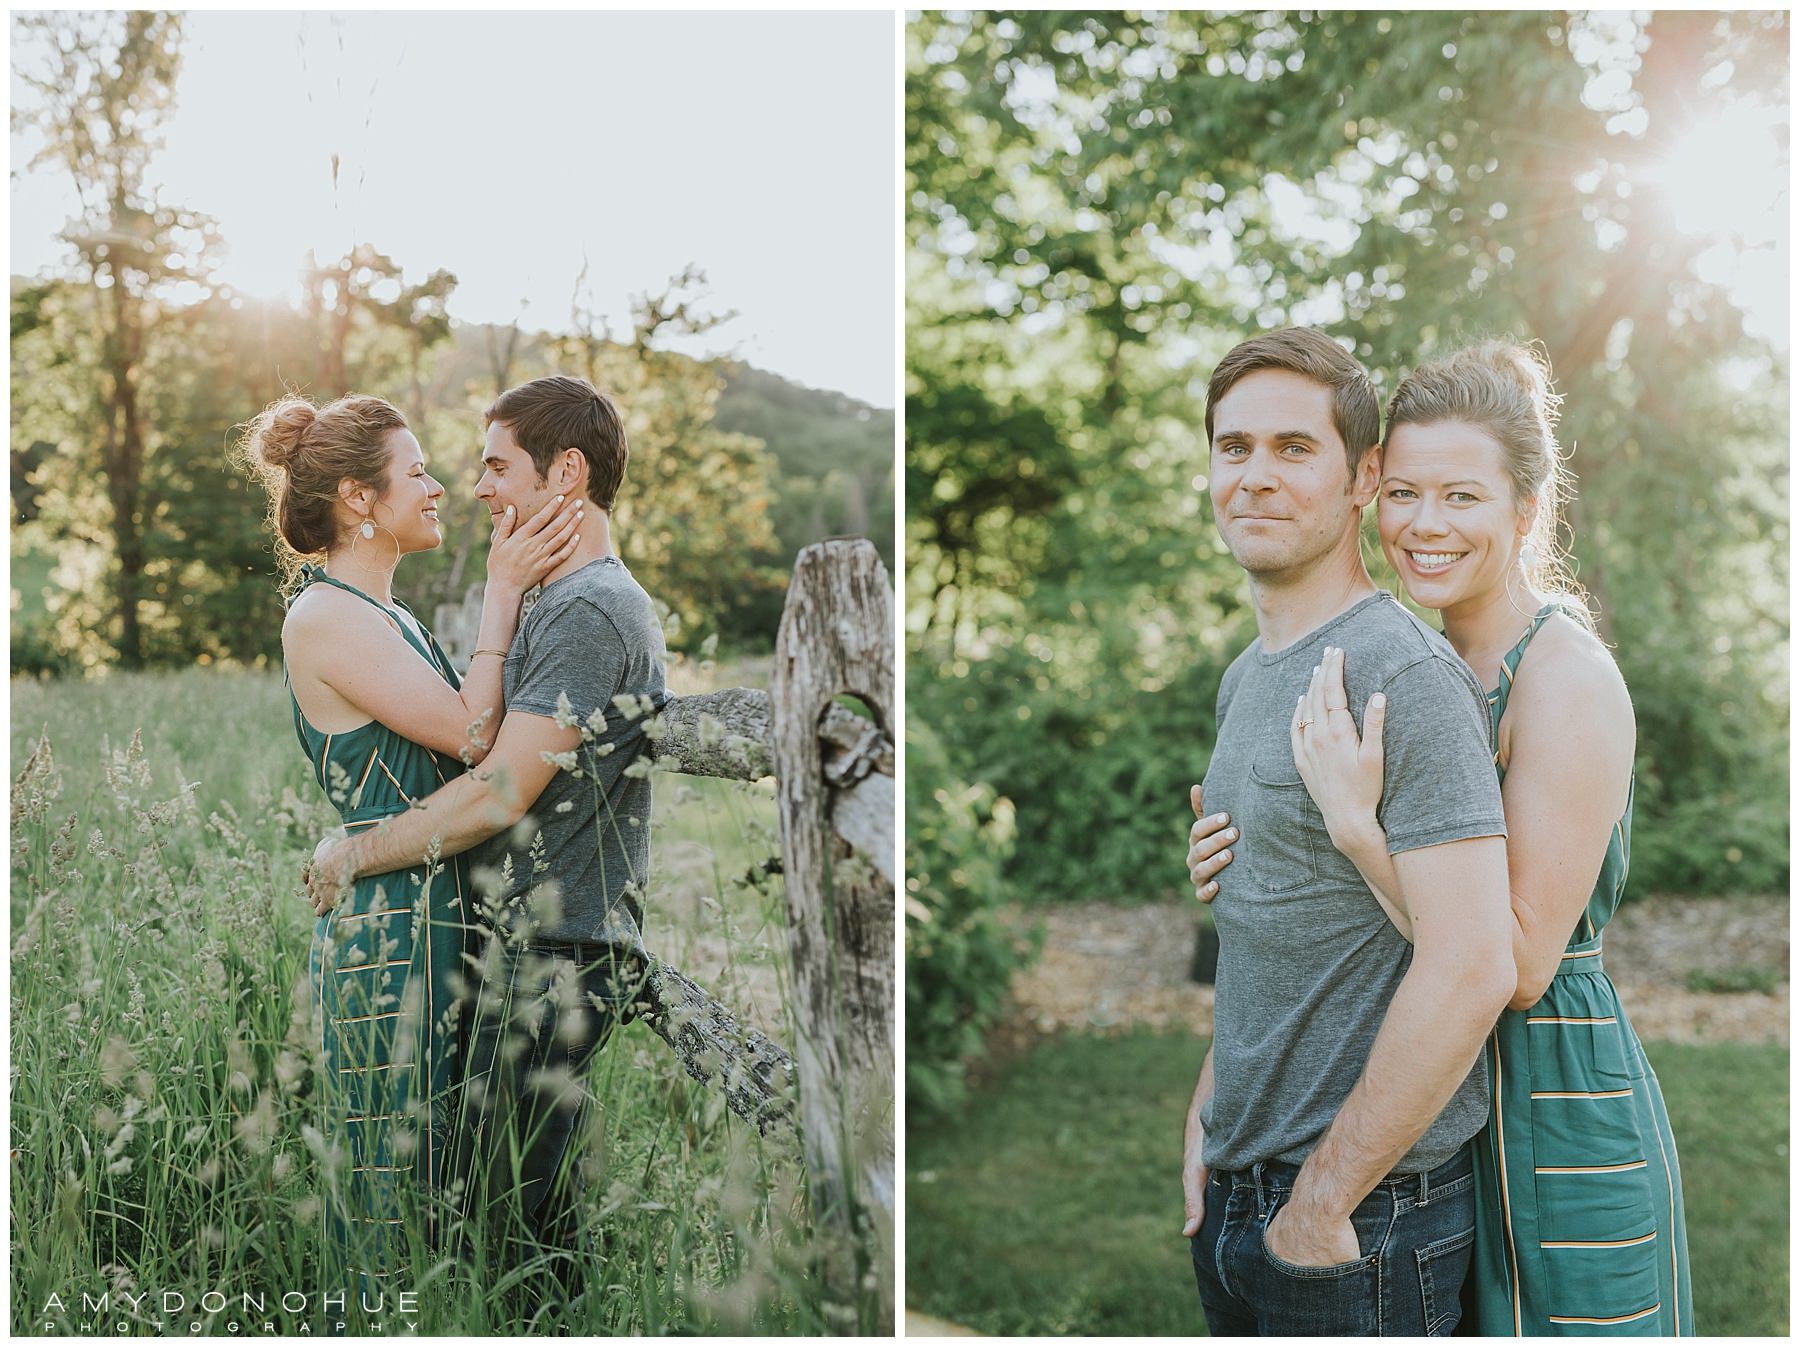 Upper Valley of Vermont and New Hampshire Engagement and Wedding Photographer | © Amy Donohue Photography